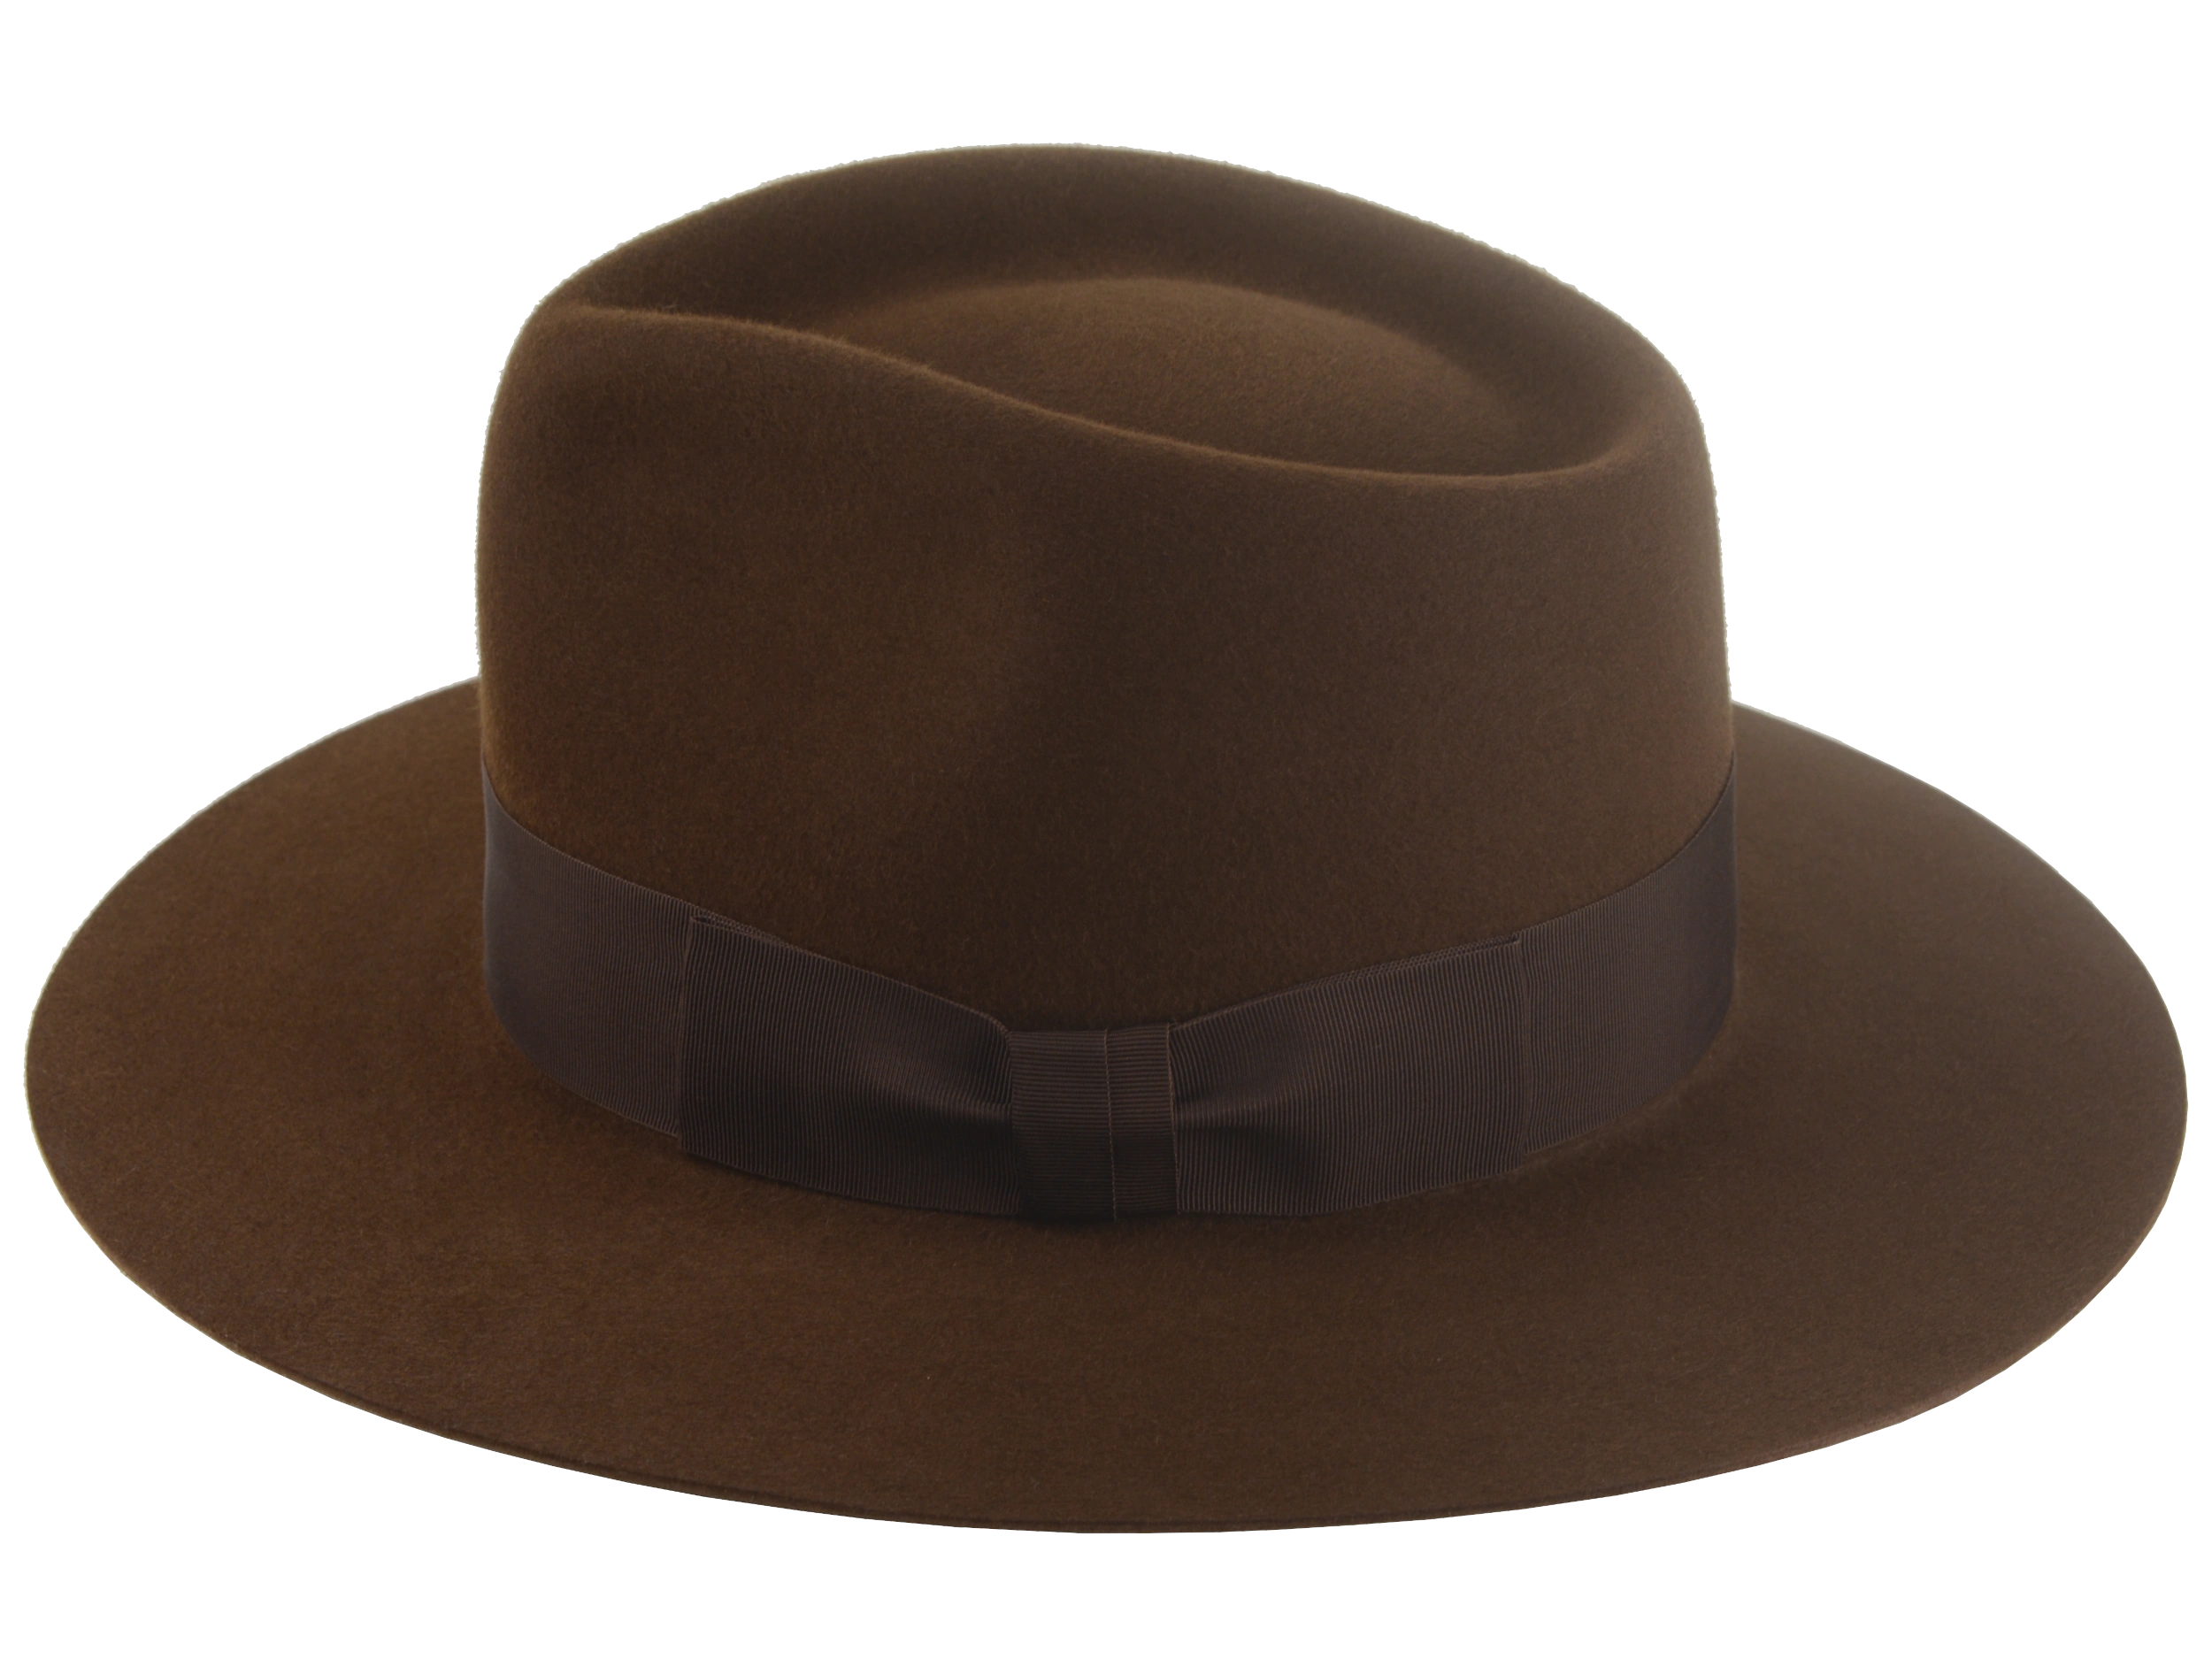 The Discoverer: Highlighting the 1 1/2" pecan grosgrain ribbon hatband for a classic look | Agnoulita Hats